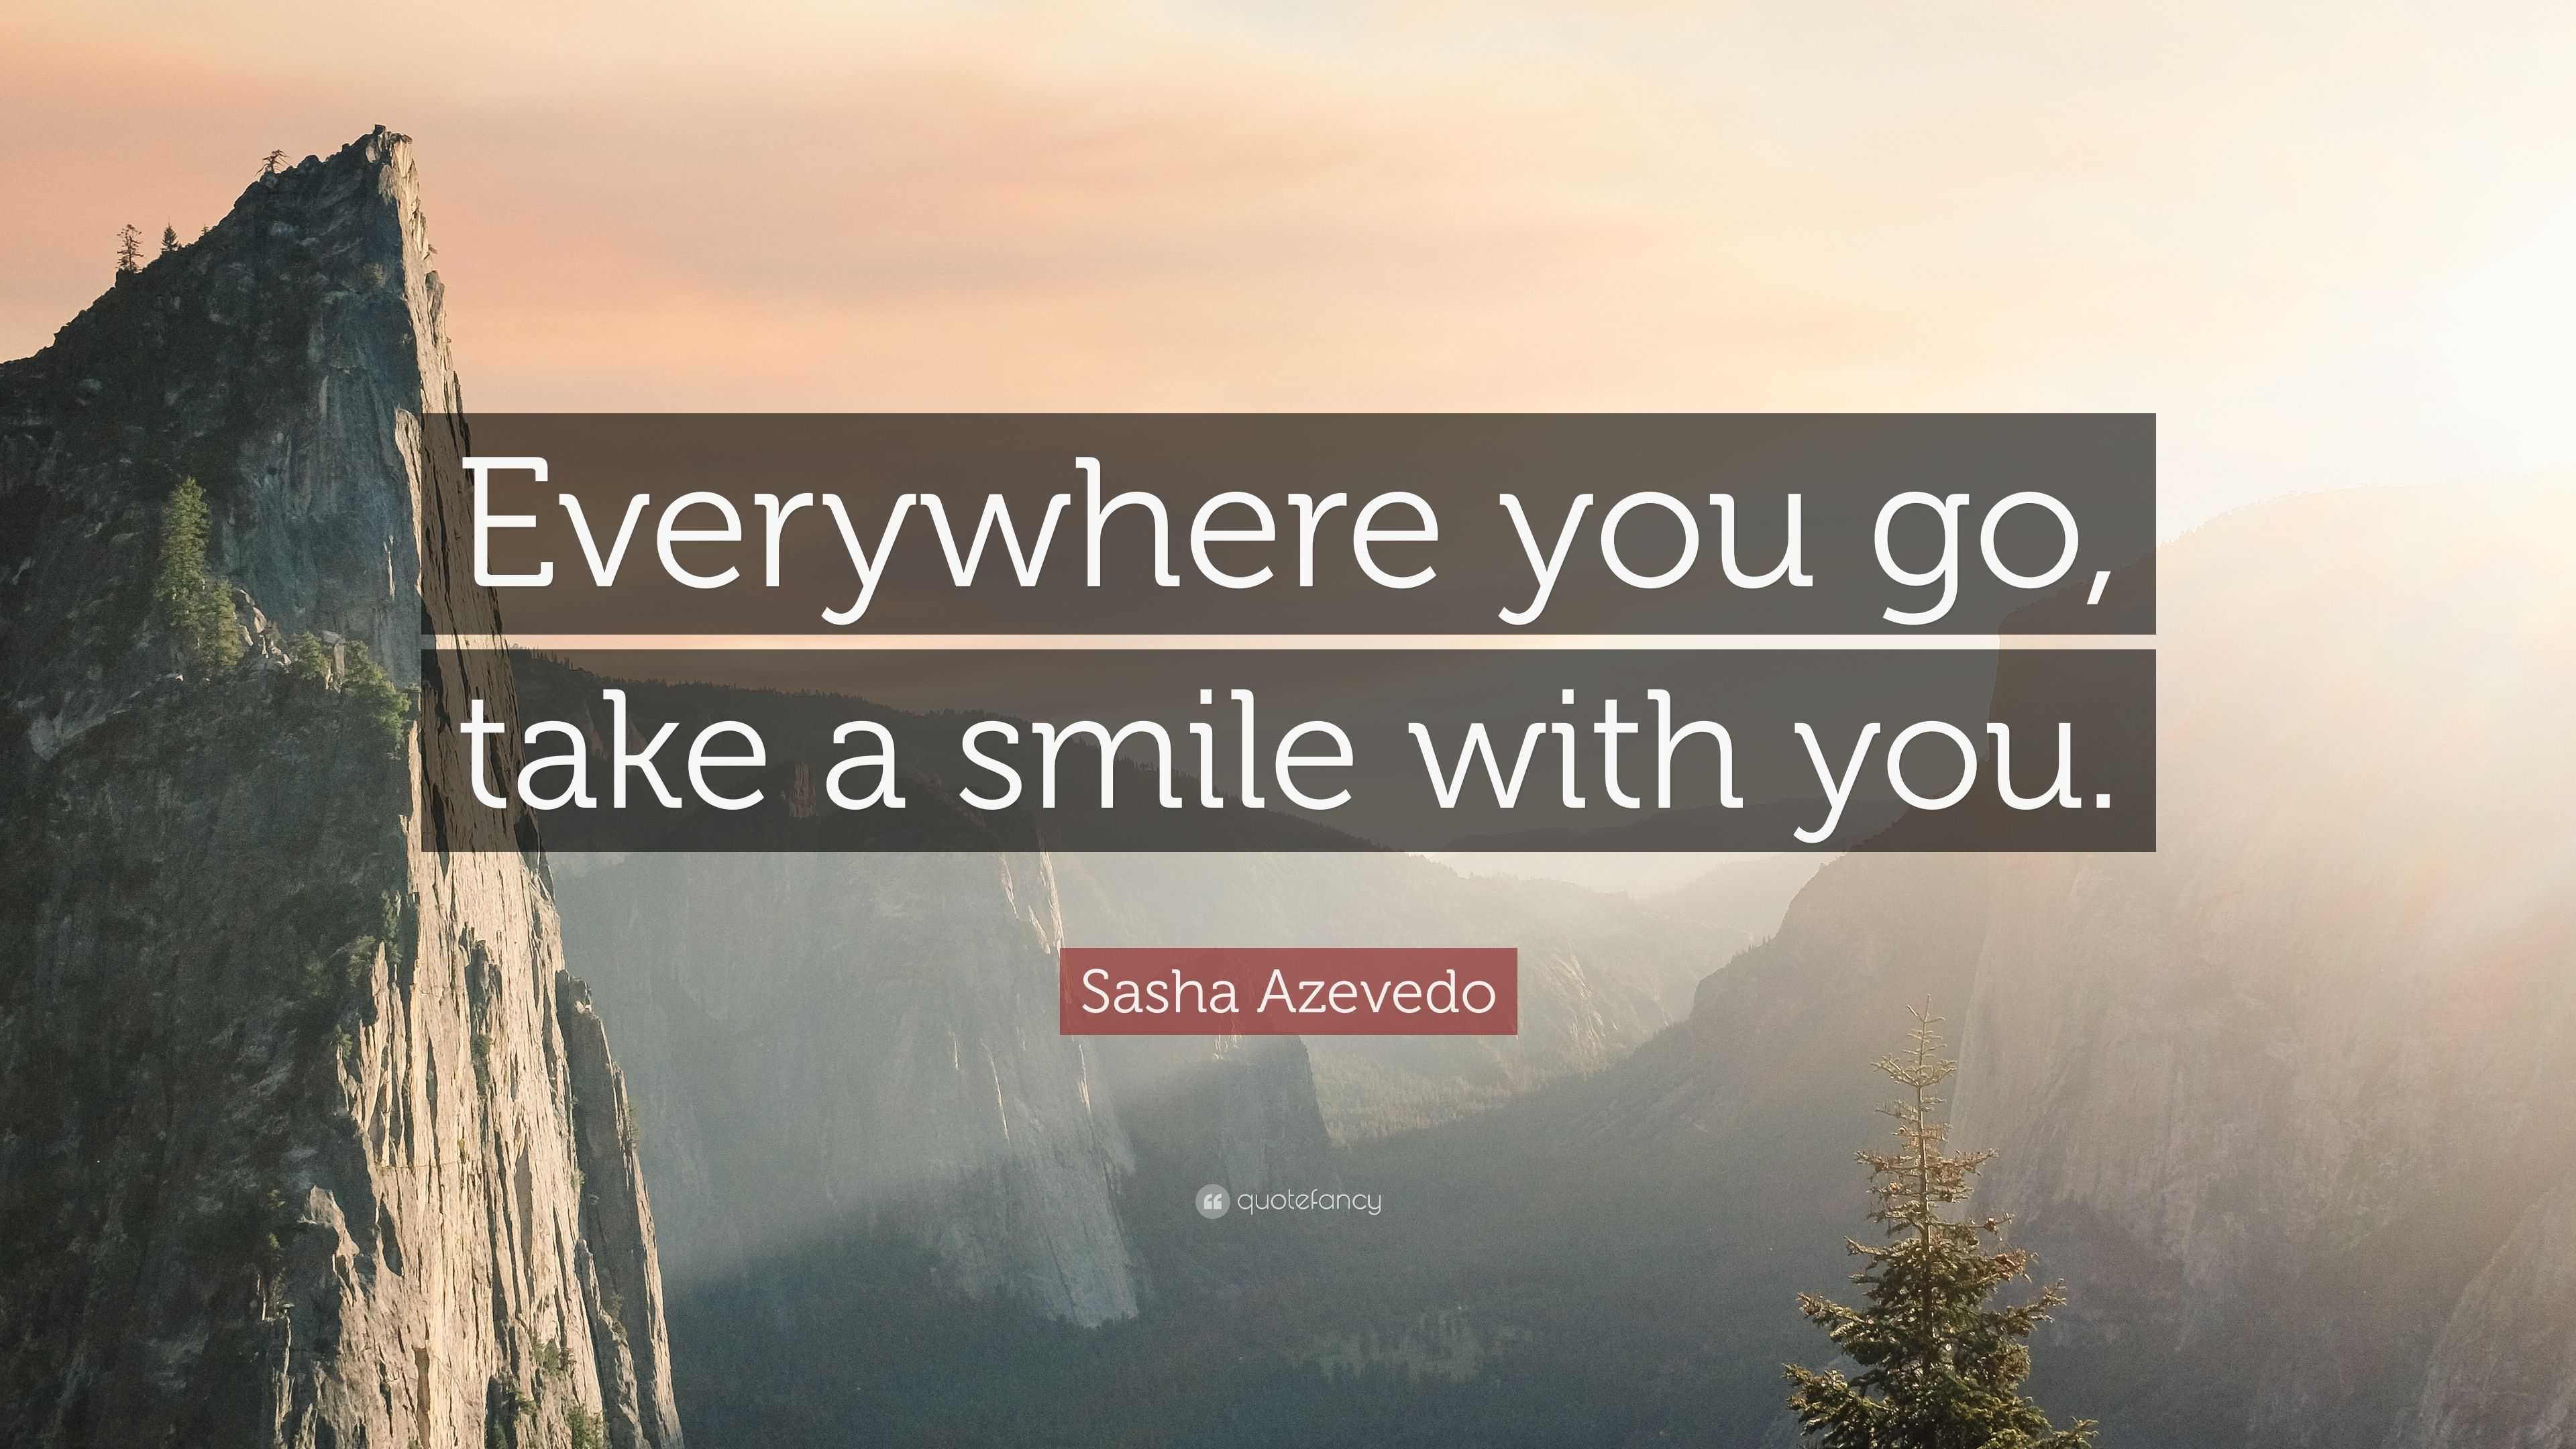 Everywhere you go, take a smile with you